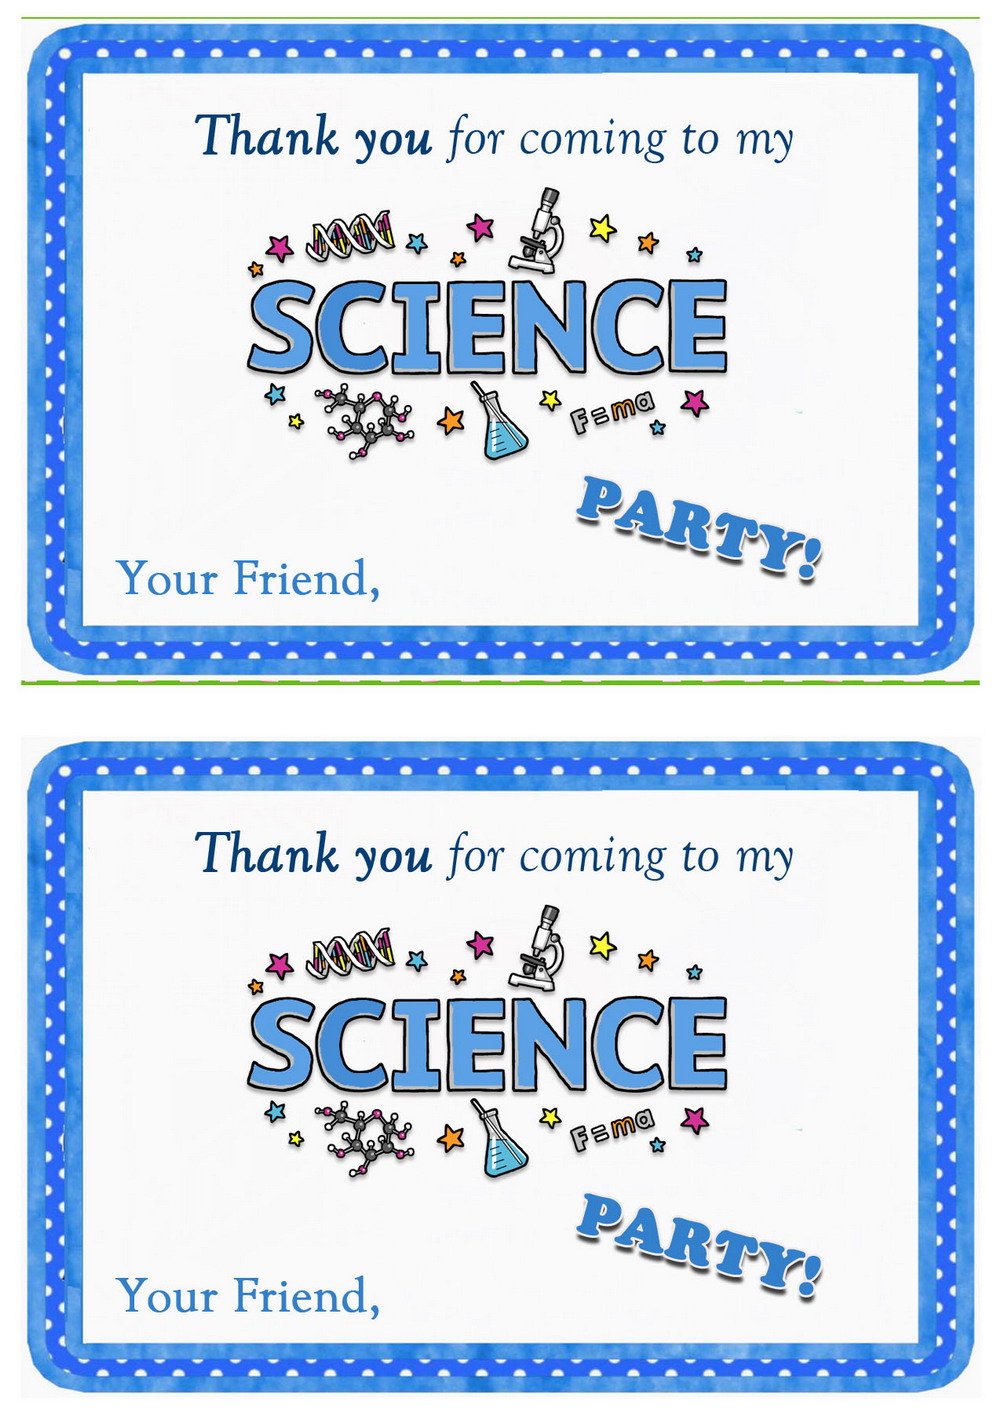 science-thank-you-cards-birthday-printable